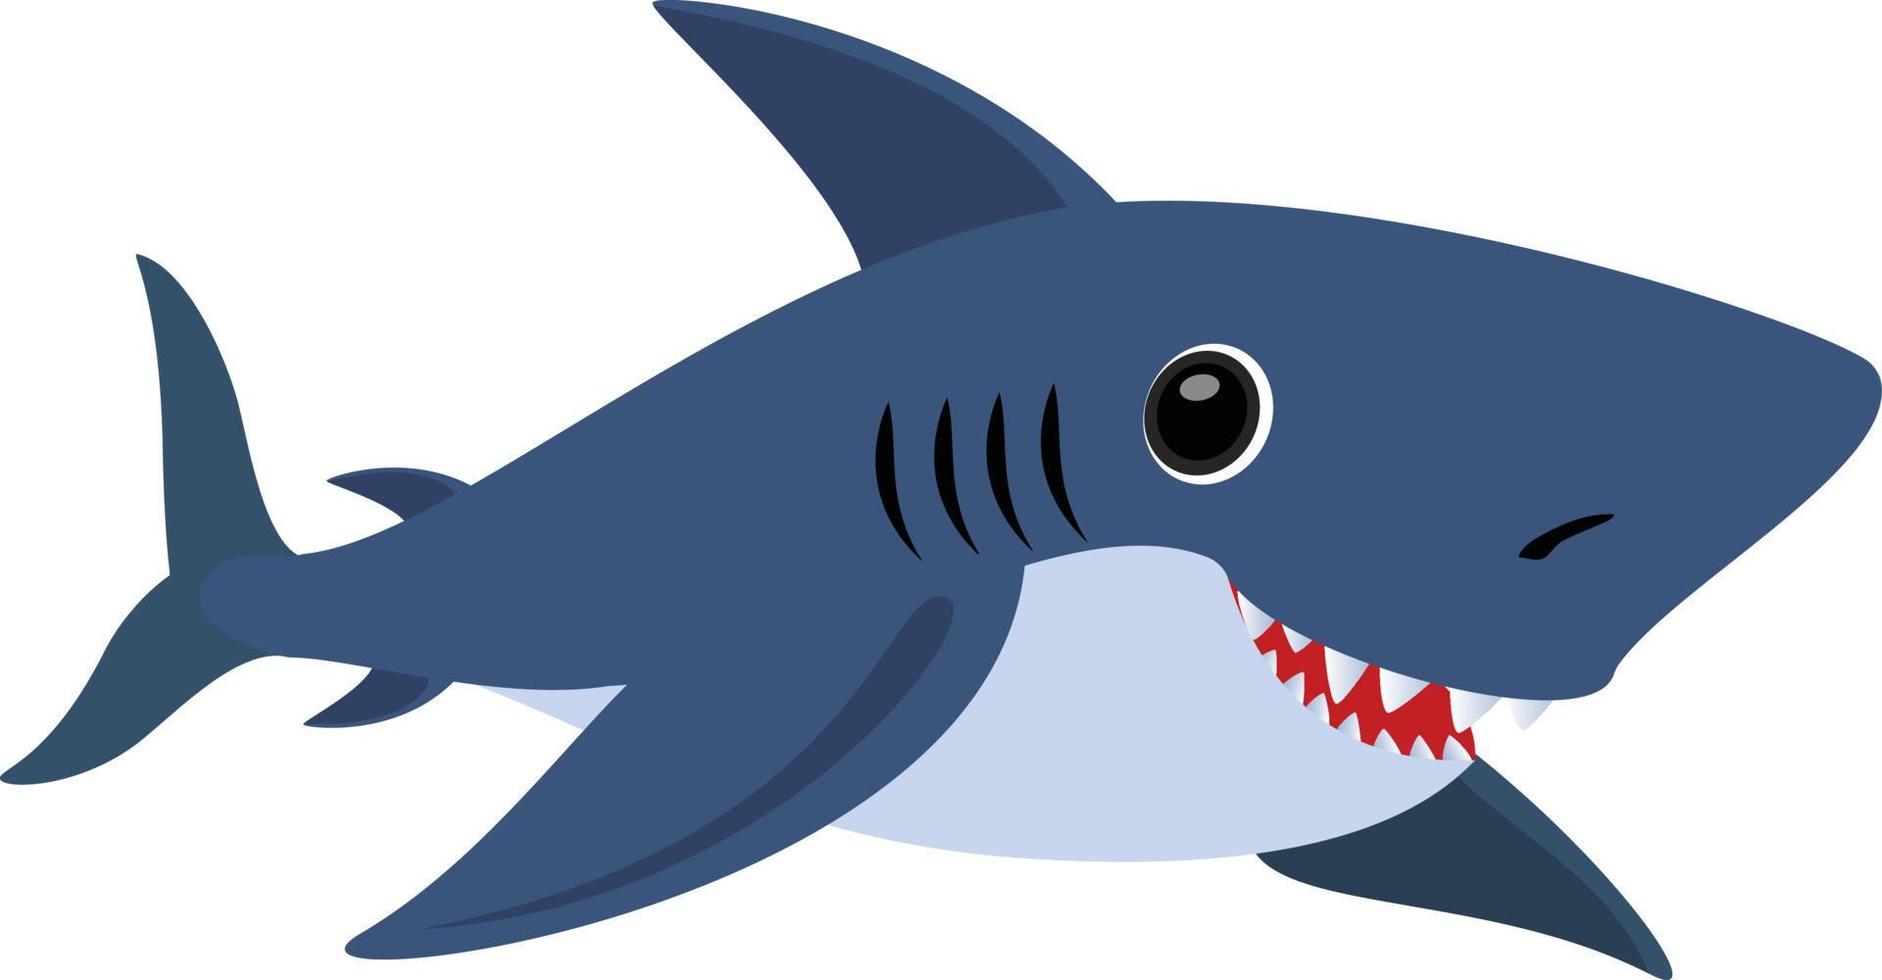 50+ Names That Mean Shark: Strength, Speed, and Ocean energy